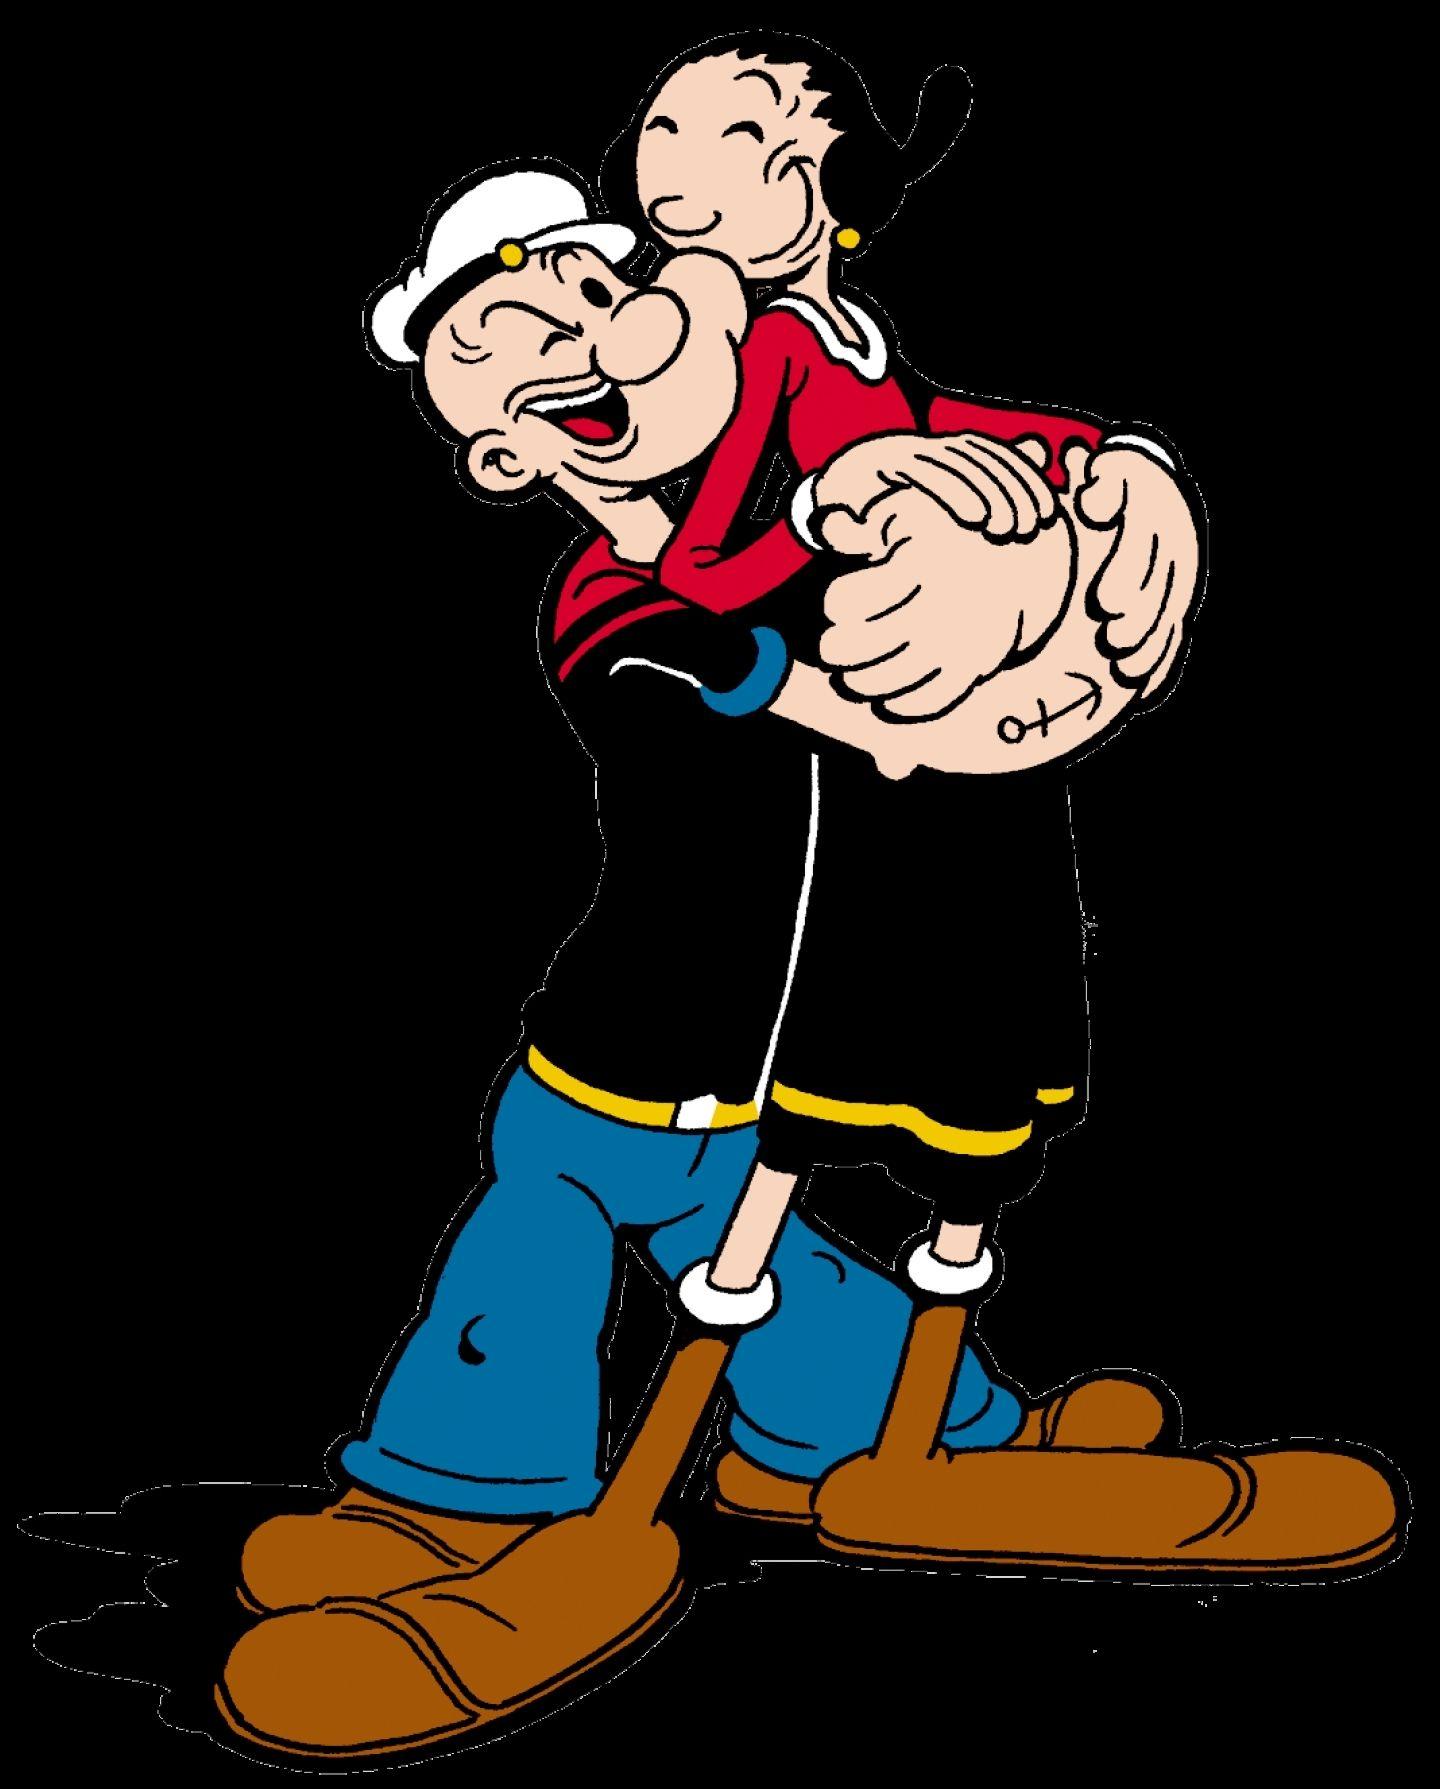 Wallpapers Popeye Hd Cartoon With Download Pf Image For PC Olive